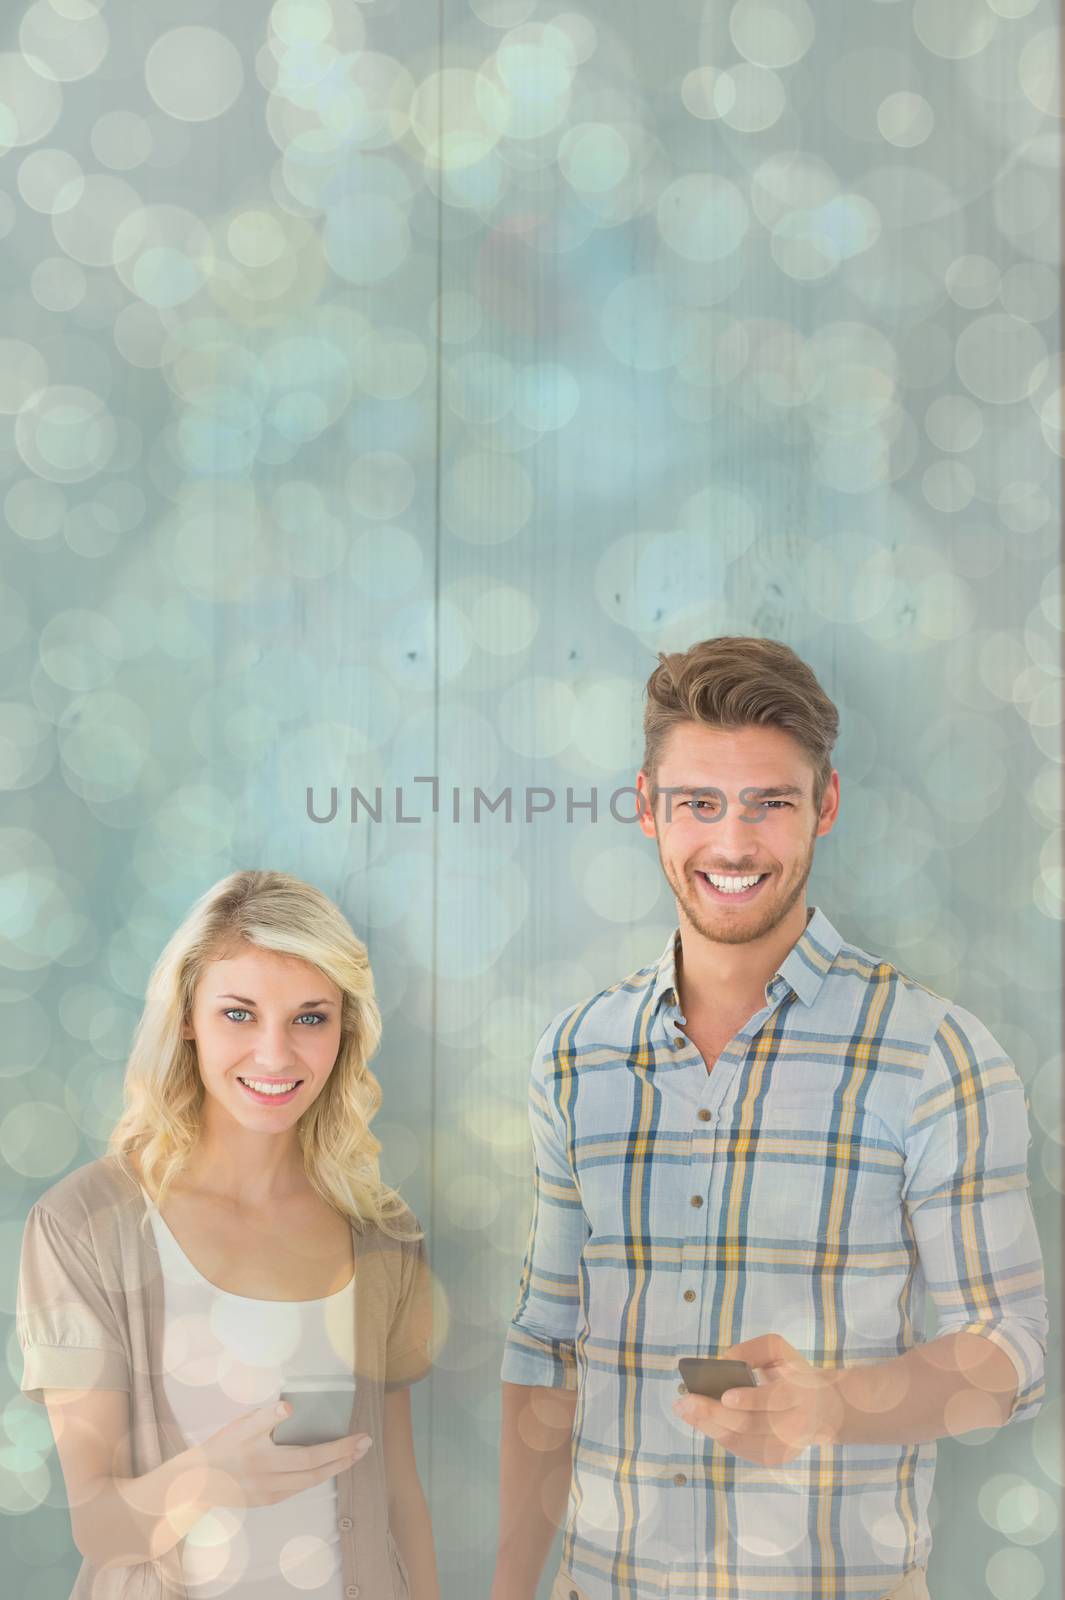 Attractive couple using their smartphones against light glowing dots design pattern